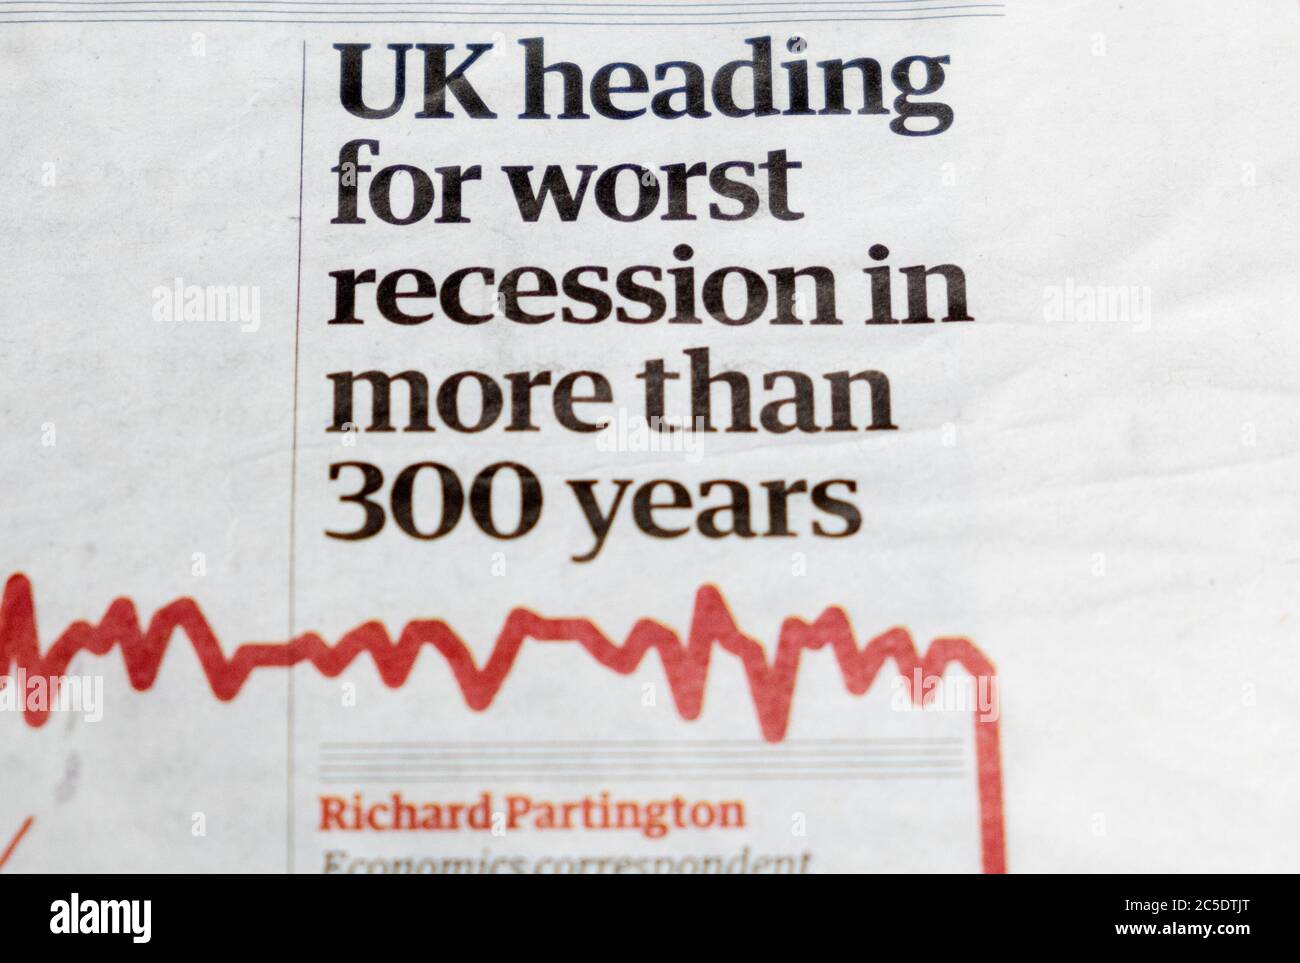 Newspaper headline on front page of The Guardian paper 'UK heading for worst recession in more than 300 years'  13 June 2020 London UK Stock Photo